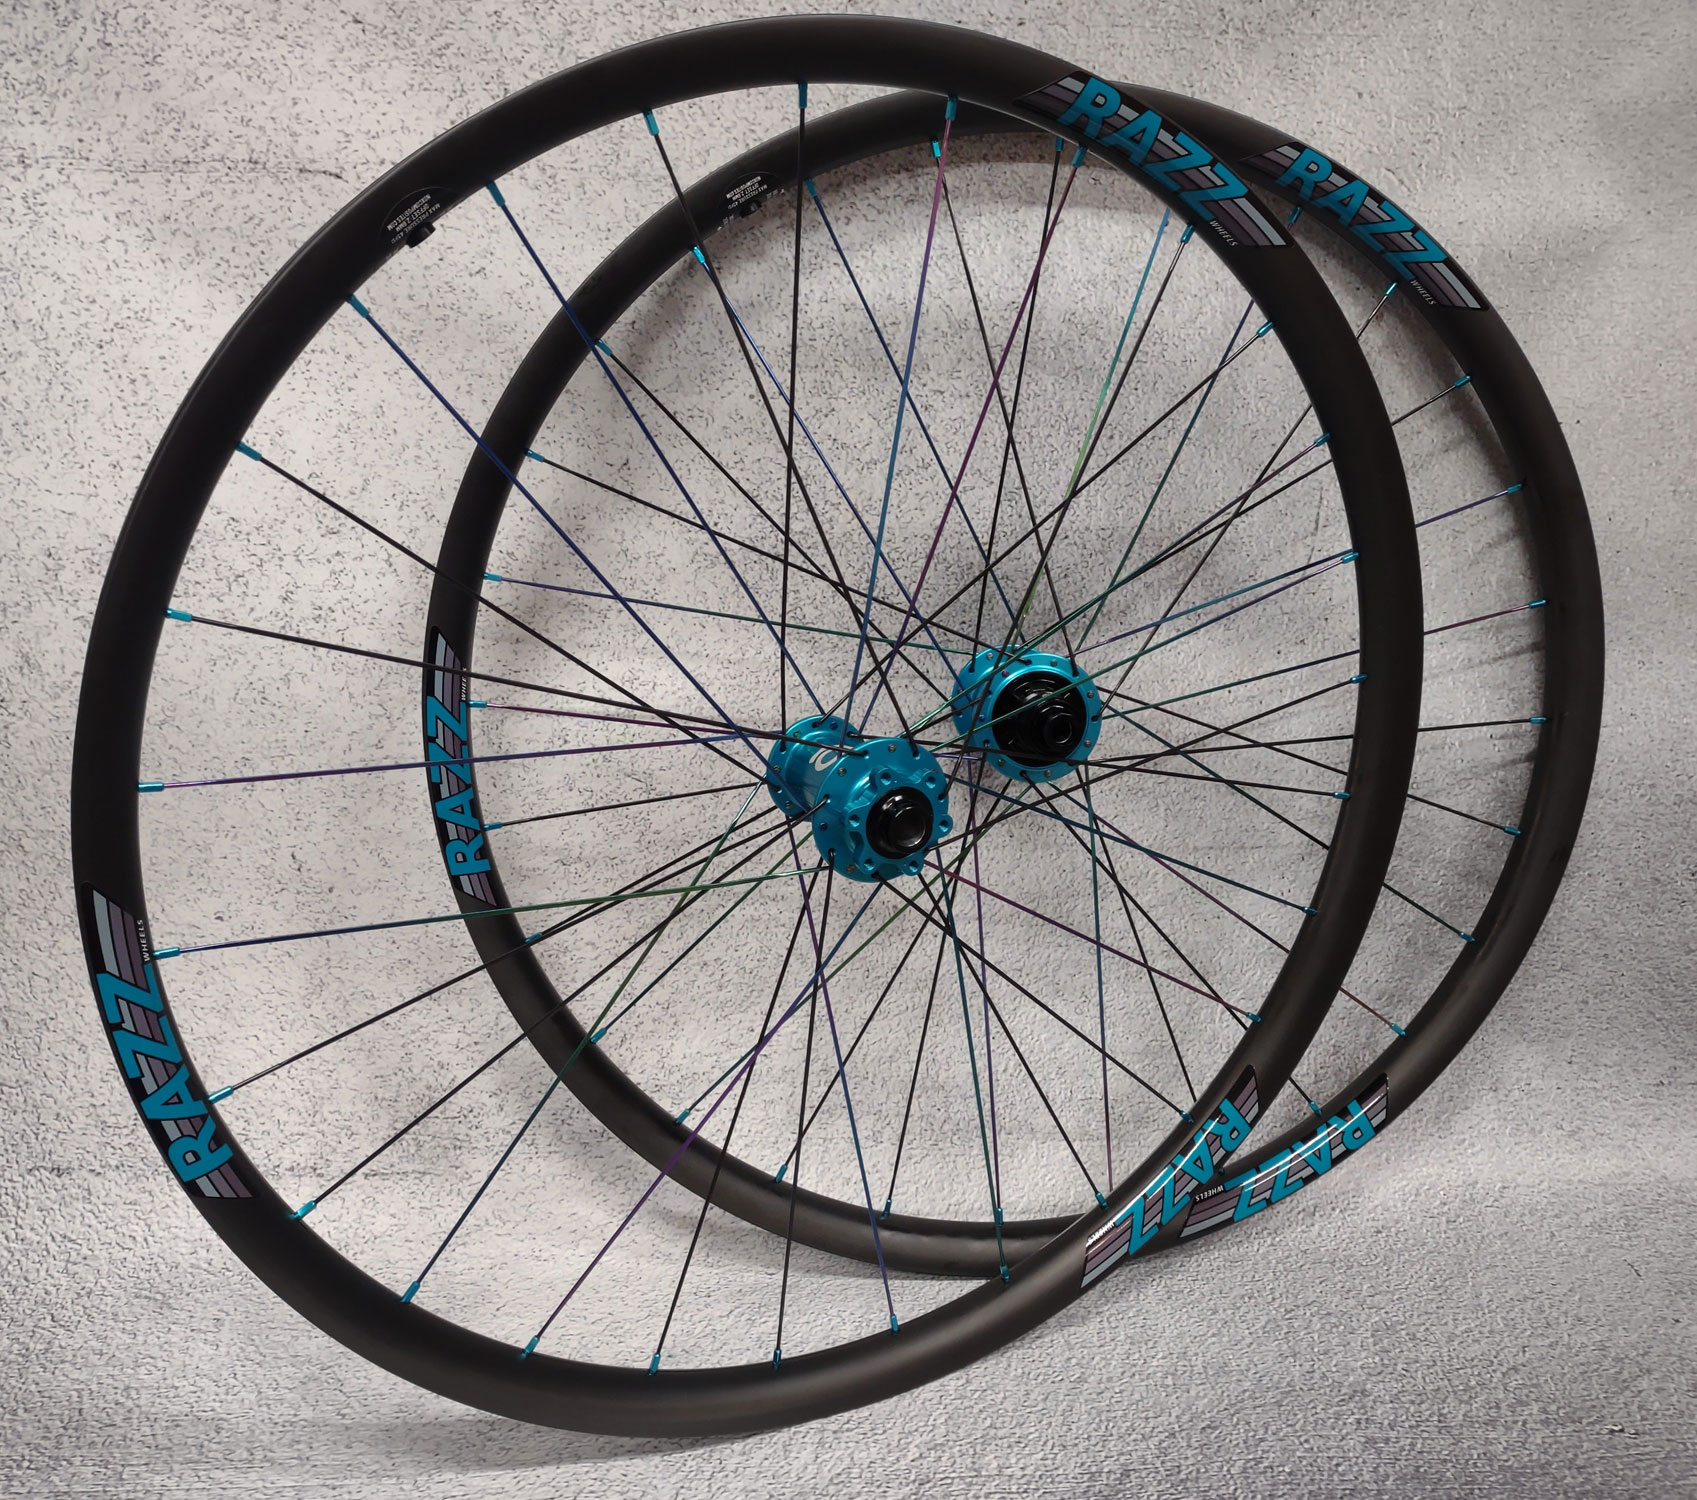 Mountain bike wheelset completed.